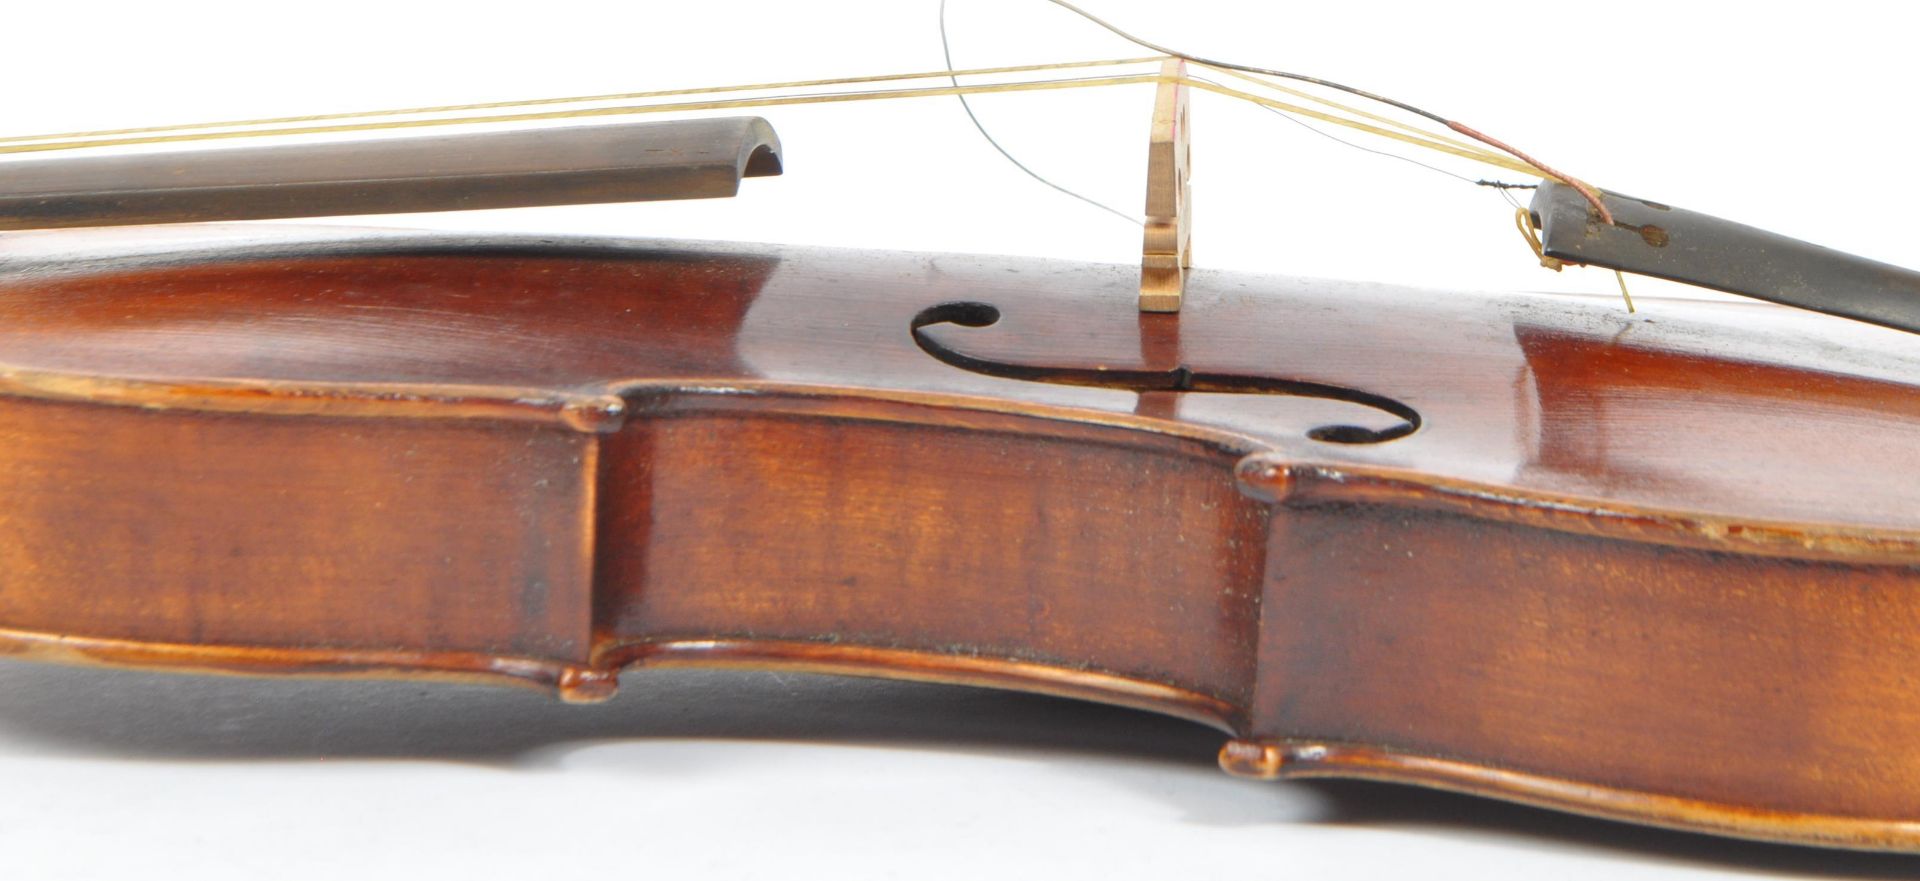 20TH CENTURY FULL SIZE VIOLIN WITH TWO PIECE BACK - Image 7 of 10